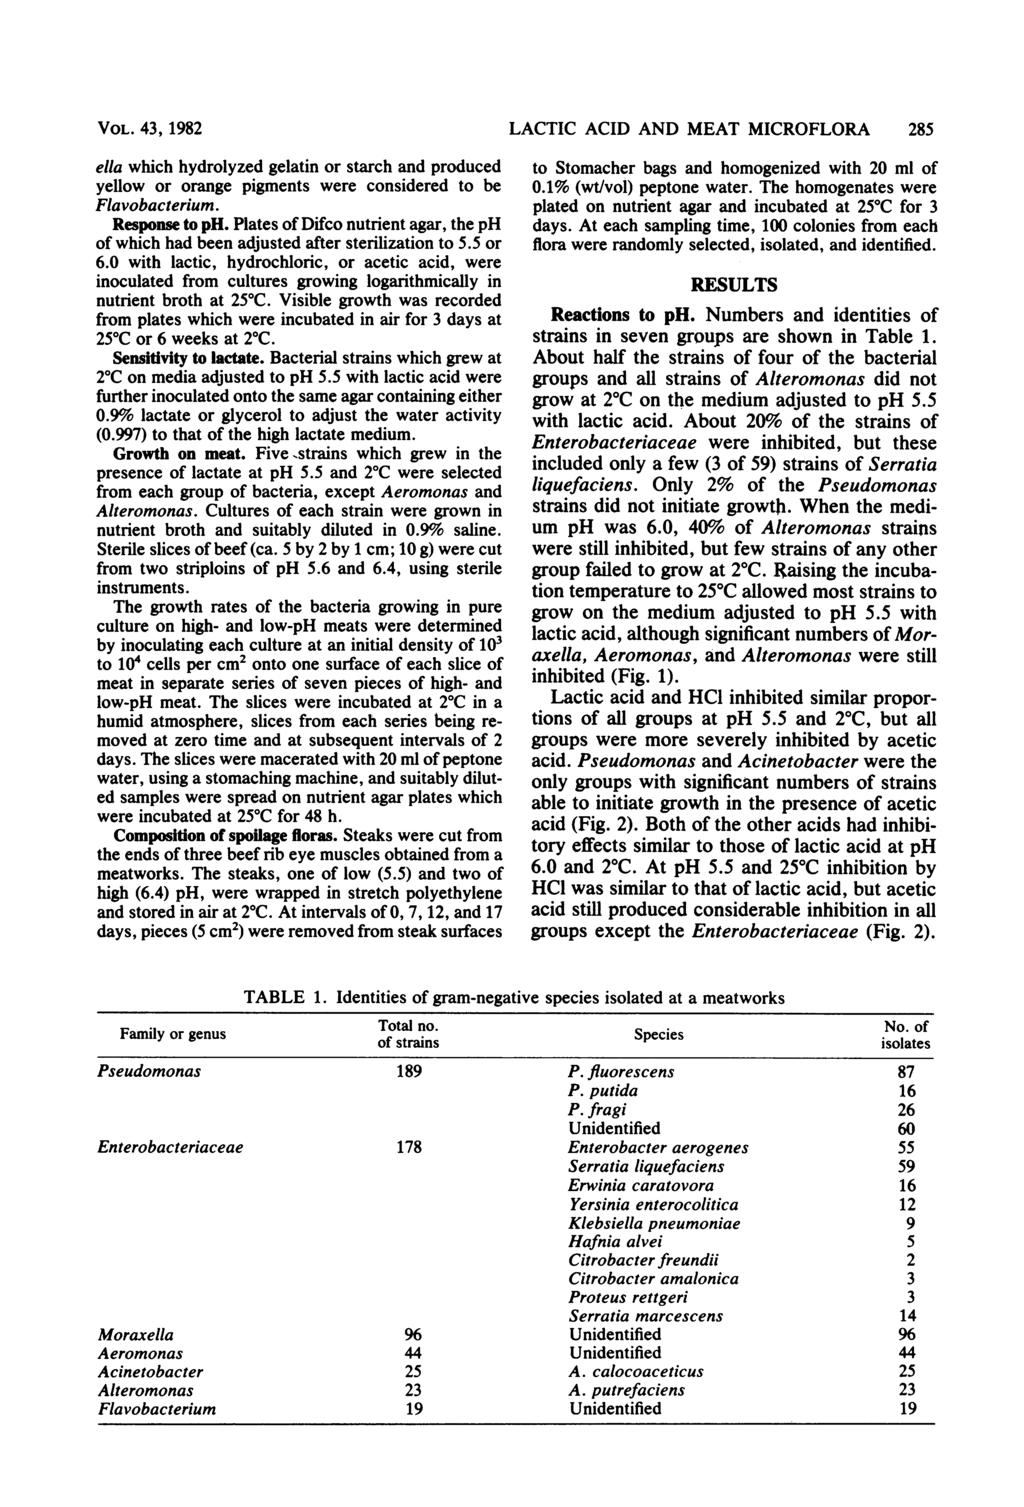 VOL. 43, 1982 ella which hydrolyzed gelatin or starch and produced yellow or orange pigments were considered to be Flavobacterium. Response to ph.